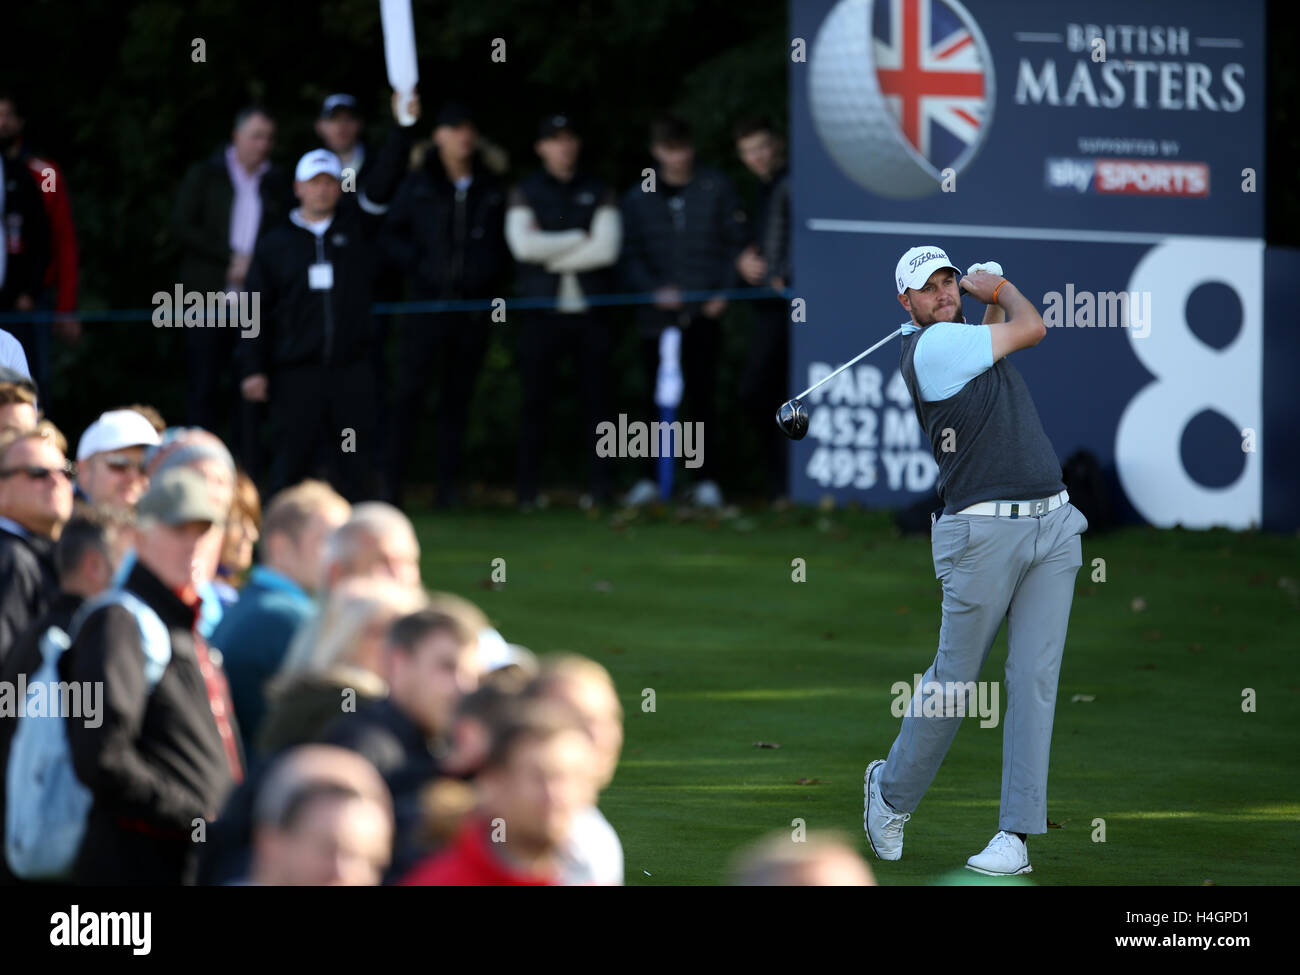 England's Matthew Southgate tees off on the 8th hole during day four of The British Masters at The Grove, Chandler's Cross. Stock Photo